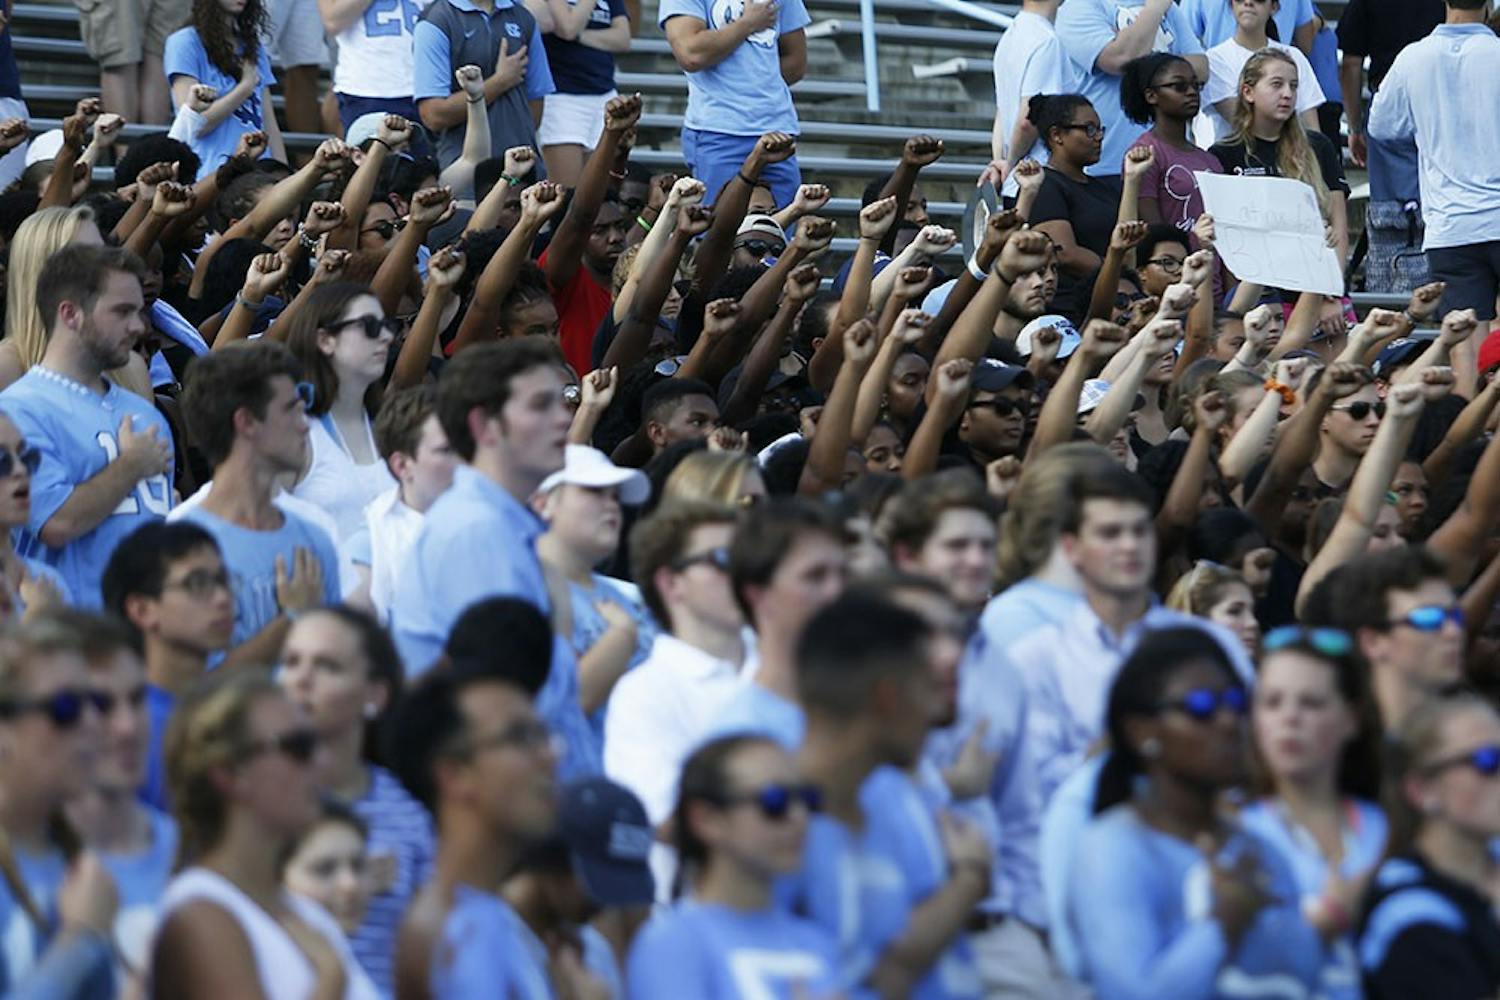 A group of UNC students dressed in all black and sat with their fists raised during the national anthem before the UNC football game on Saturday.